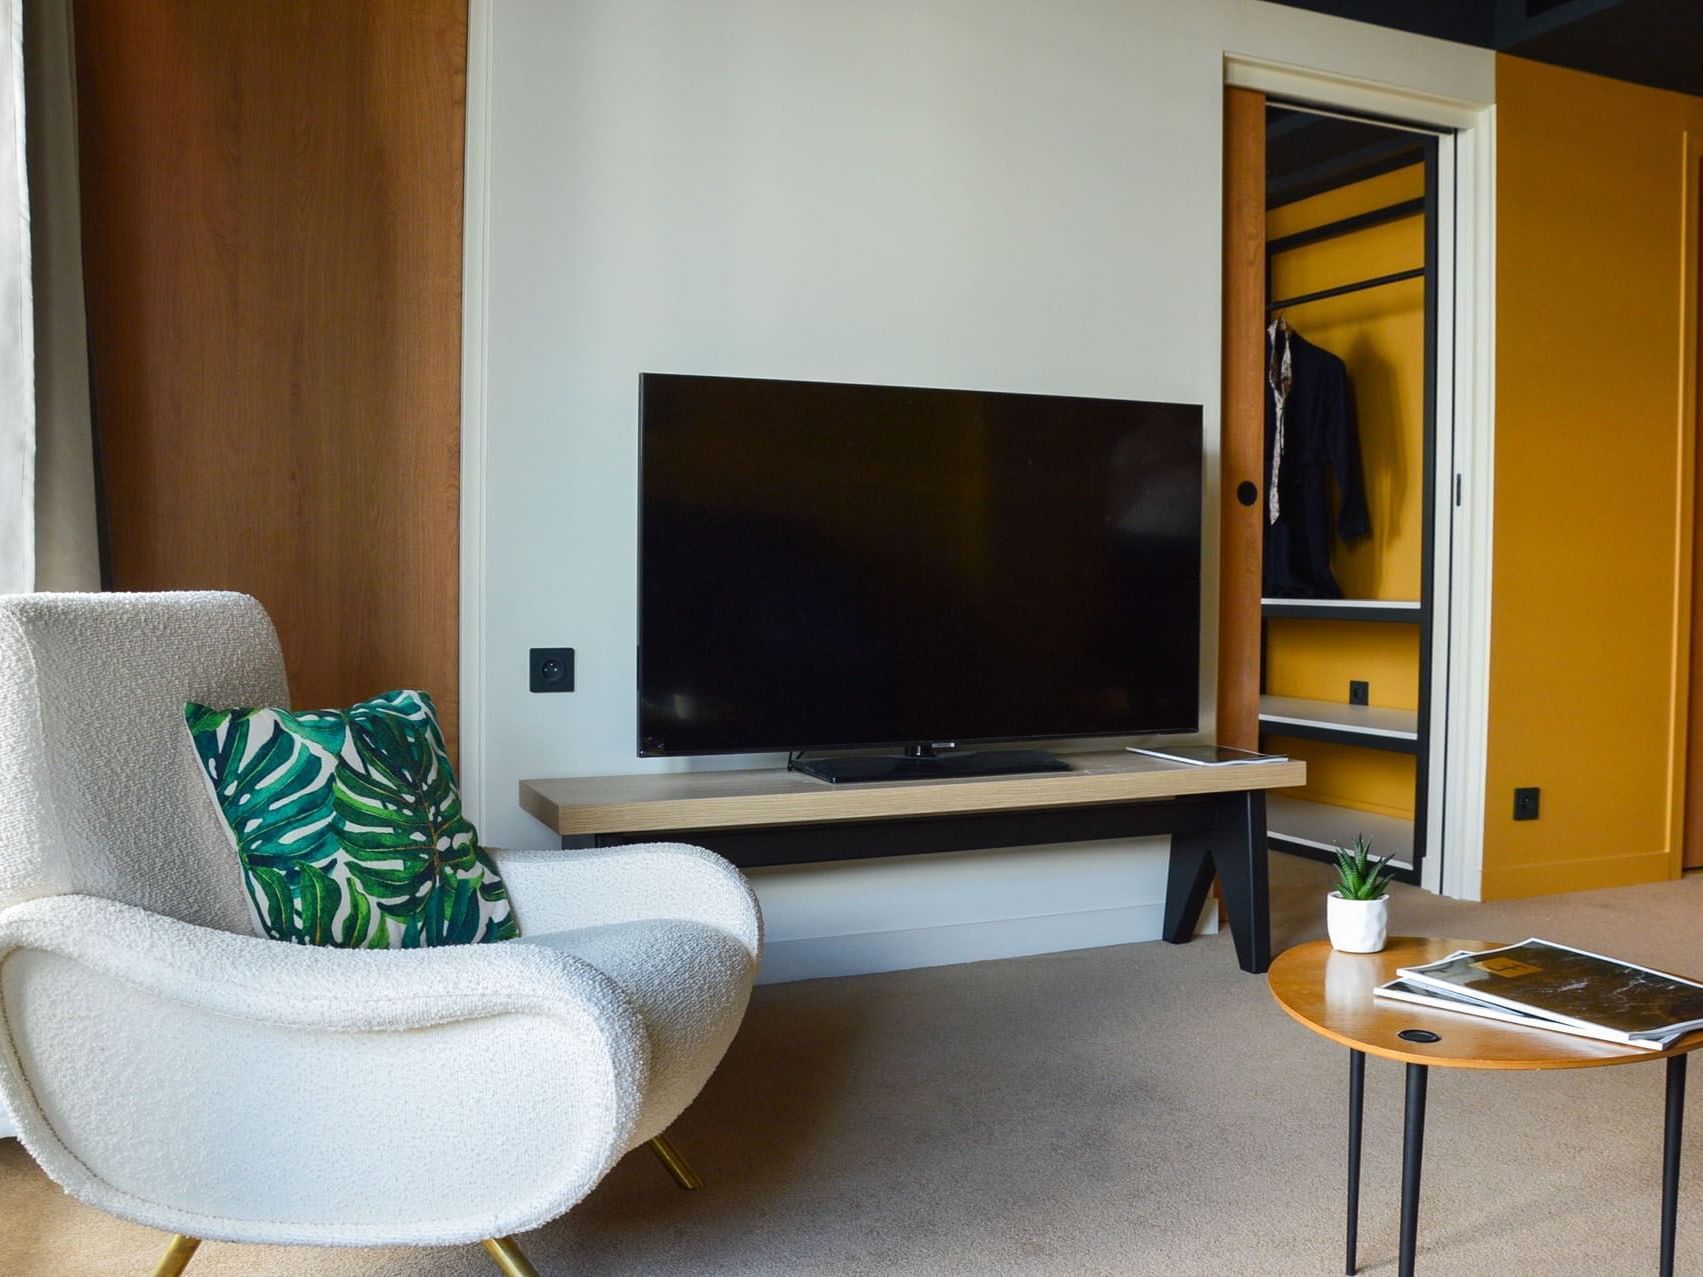 Lounge & TV in the living area of Junior suite at Kopster Hotel